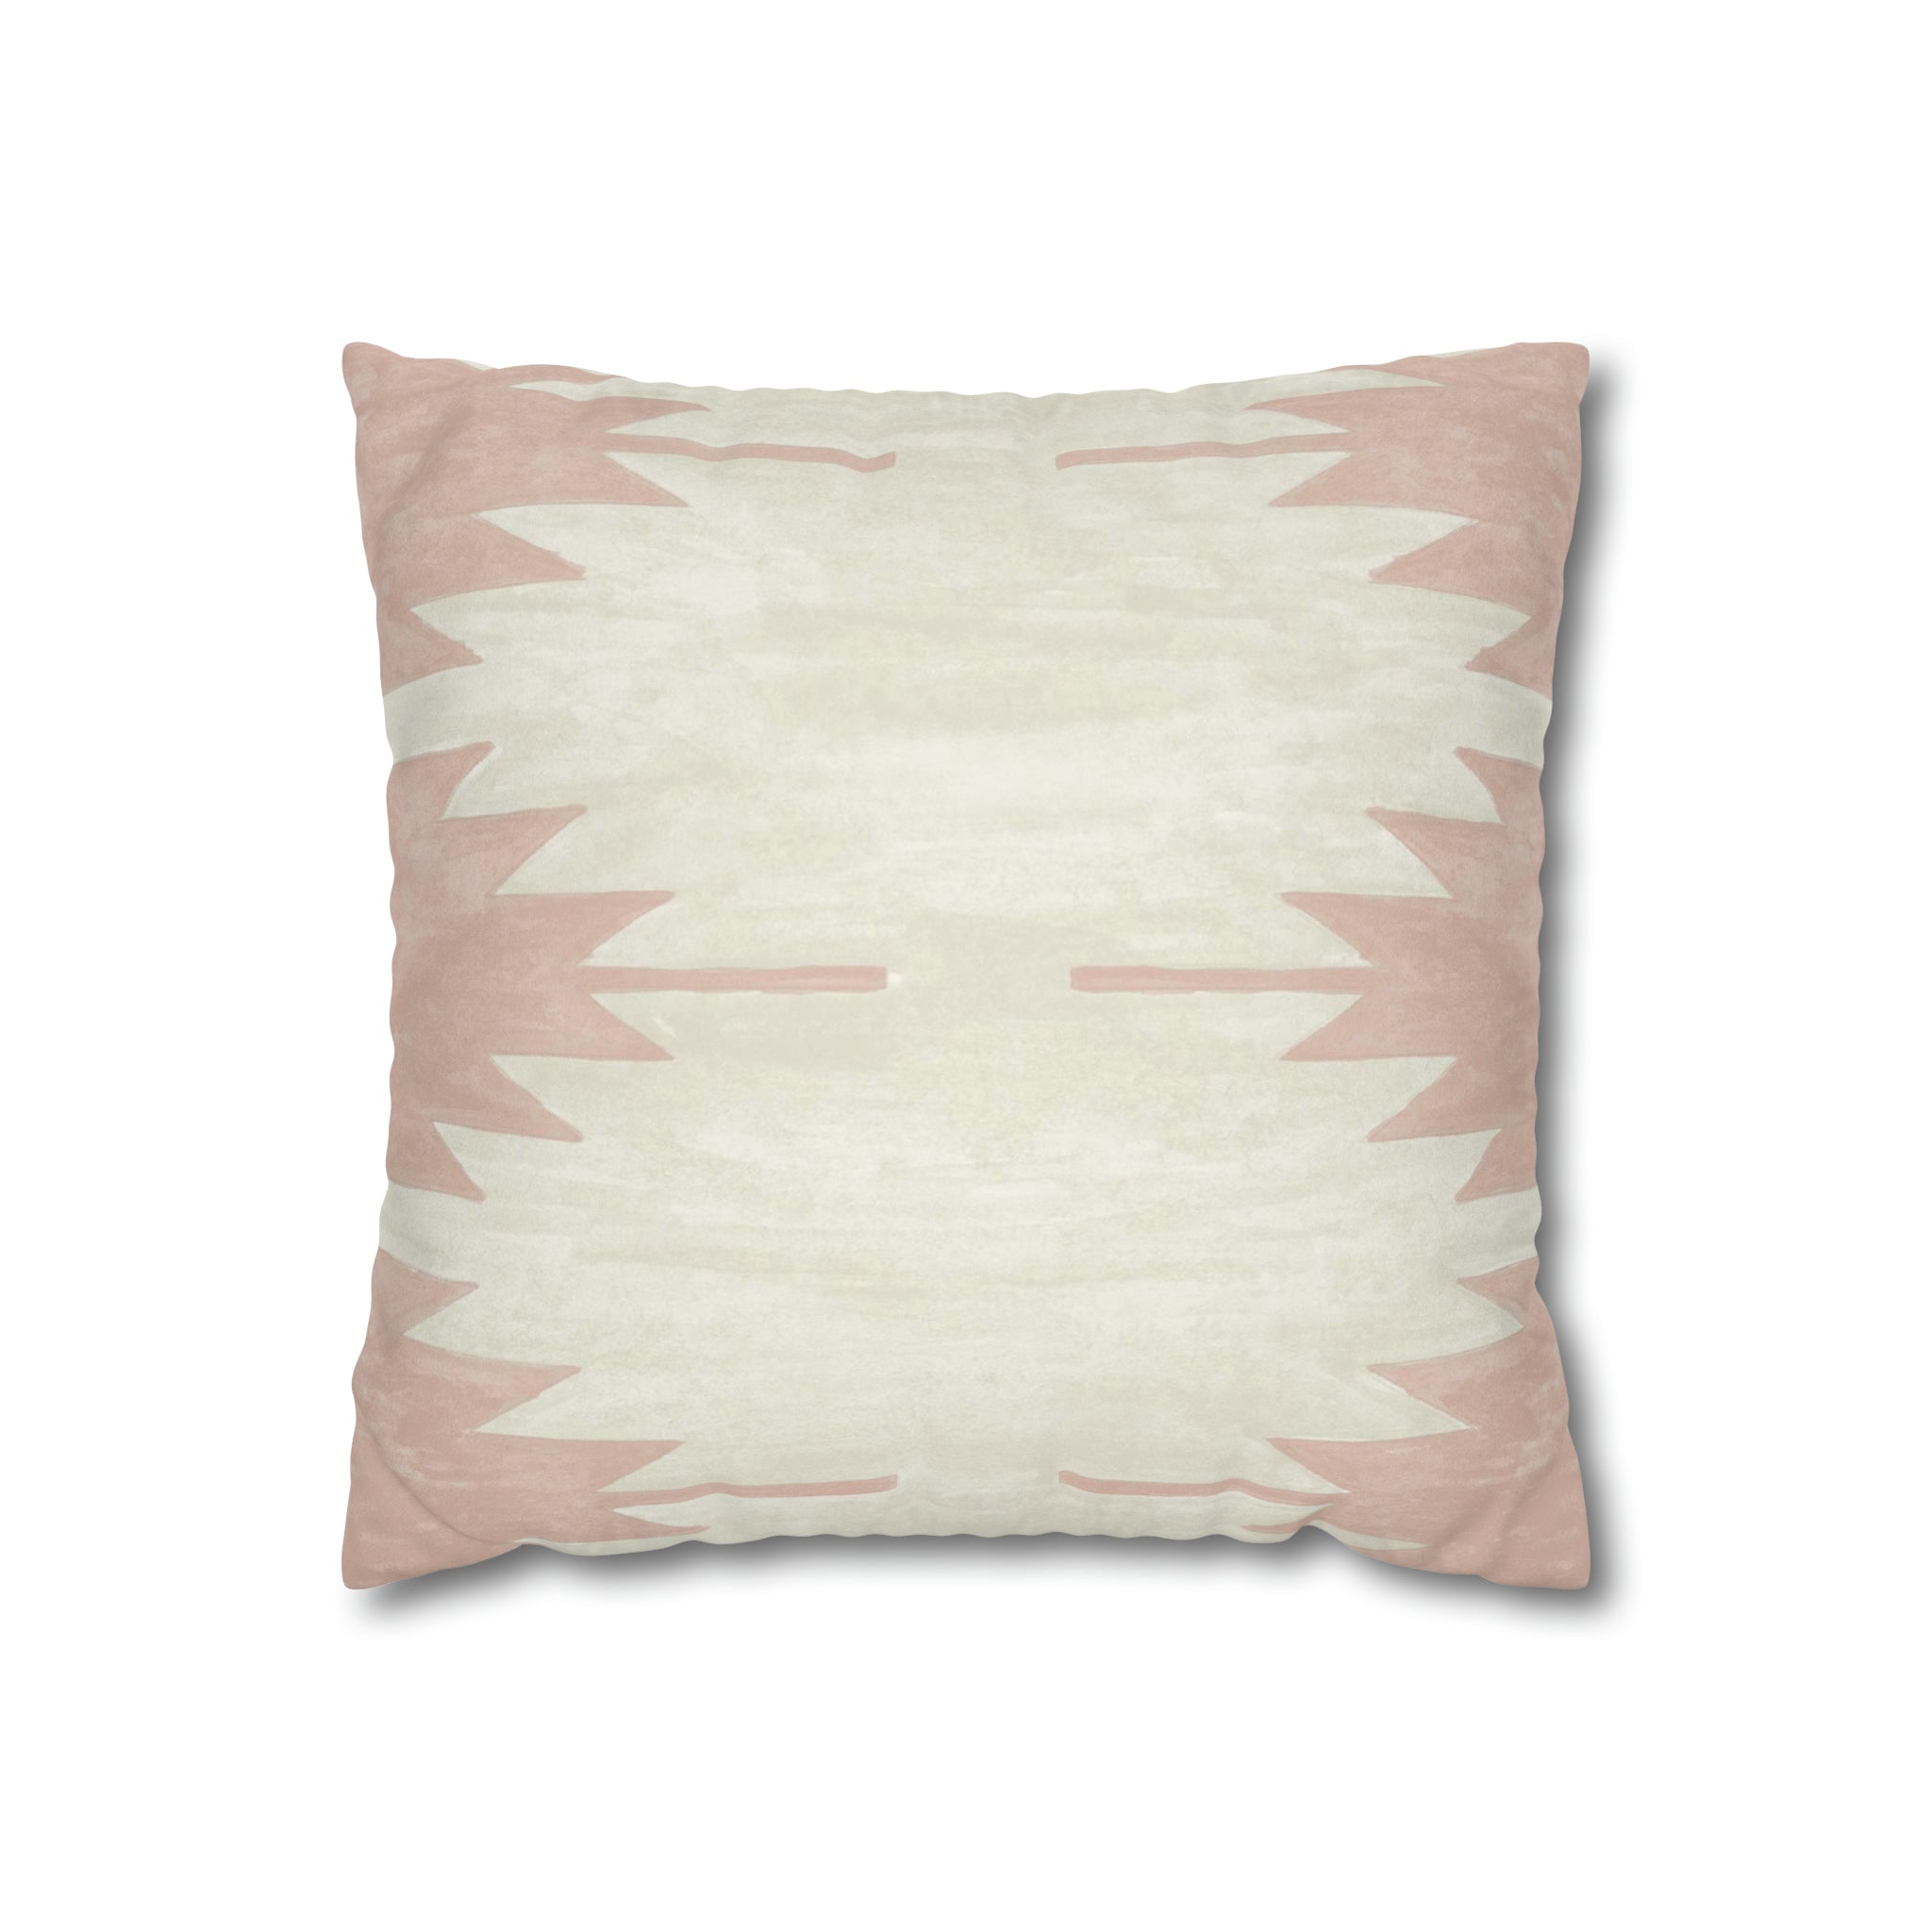 Mojave Microsuede Square Pillow Cover